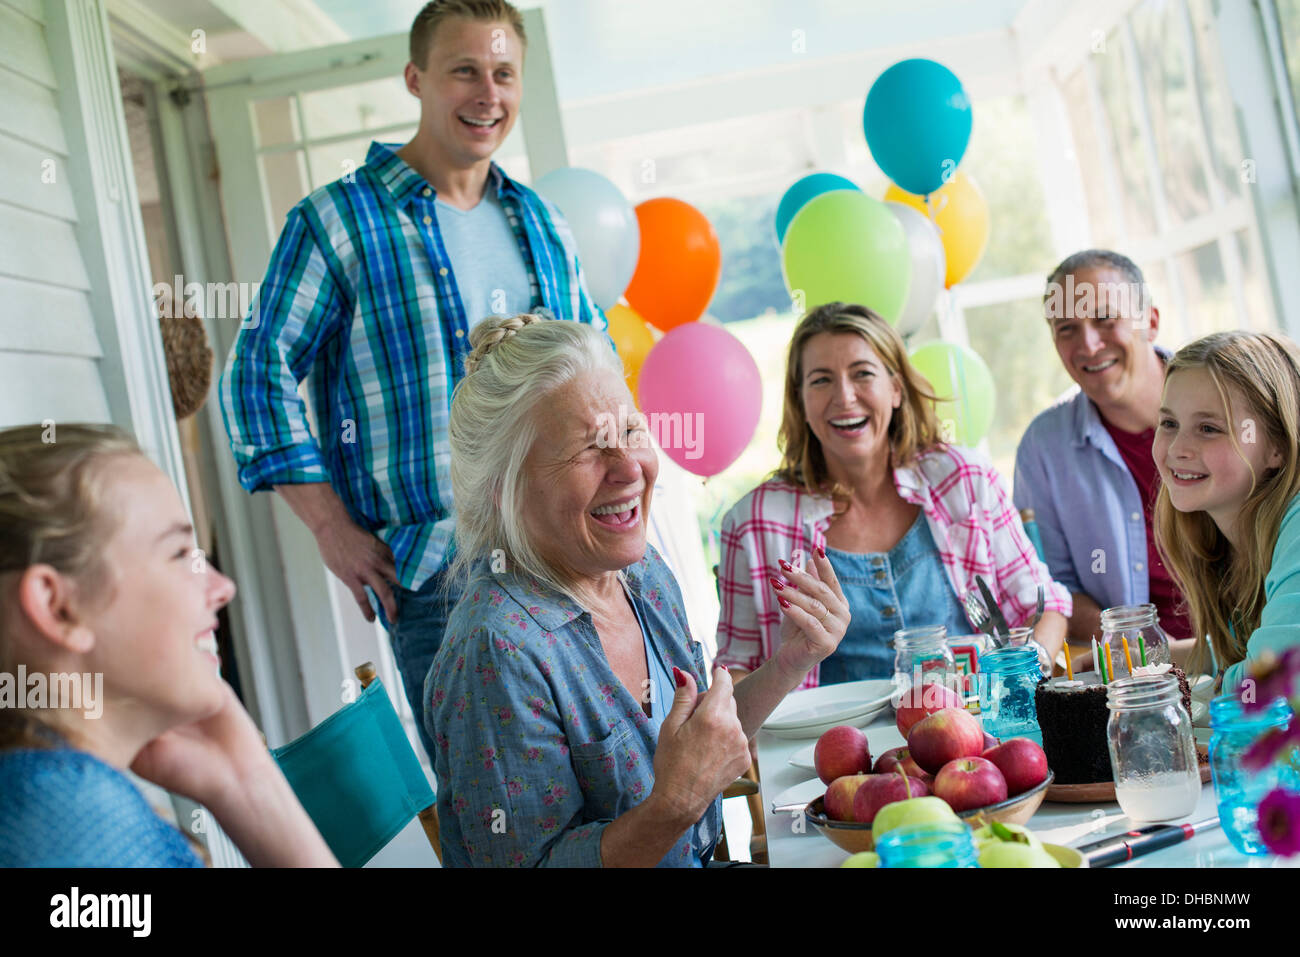 A birthday party in a farmhouse kitchen. A group of adults and children gathered around a chocolate cake. Stock Photo